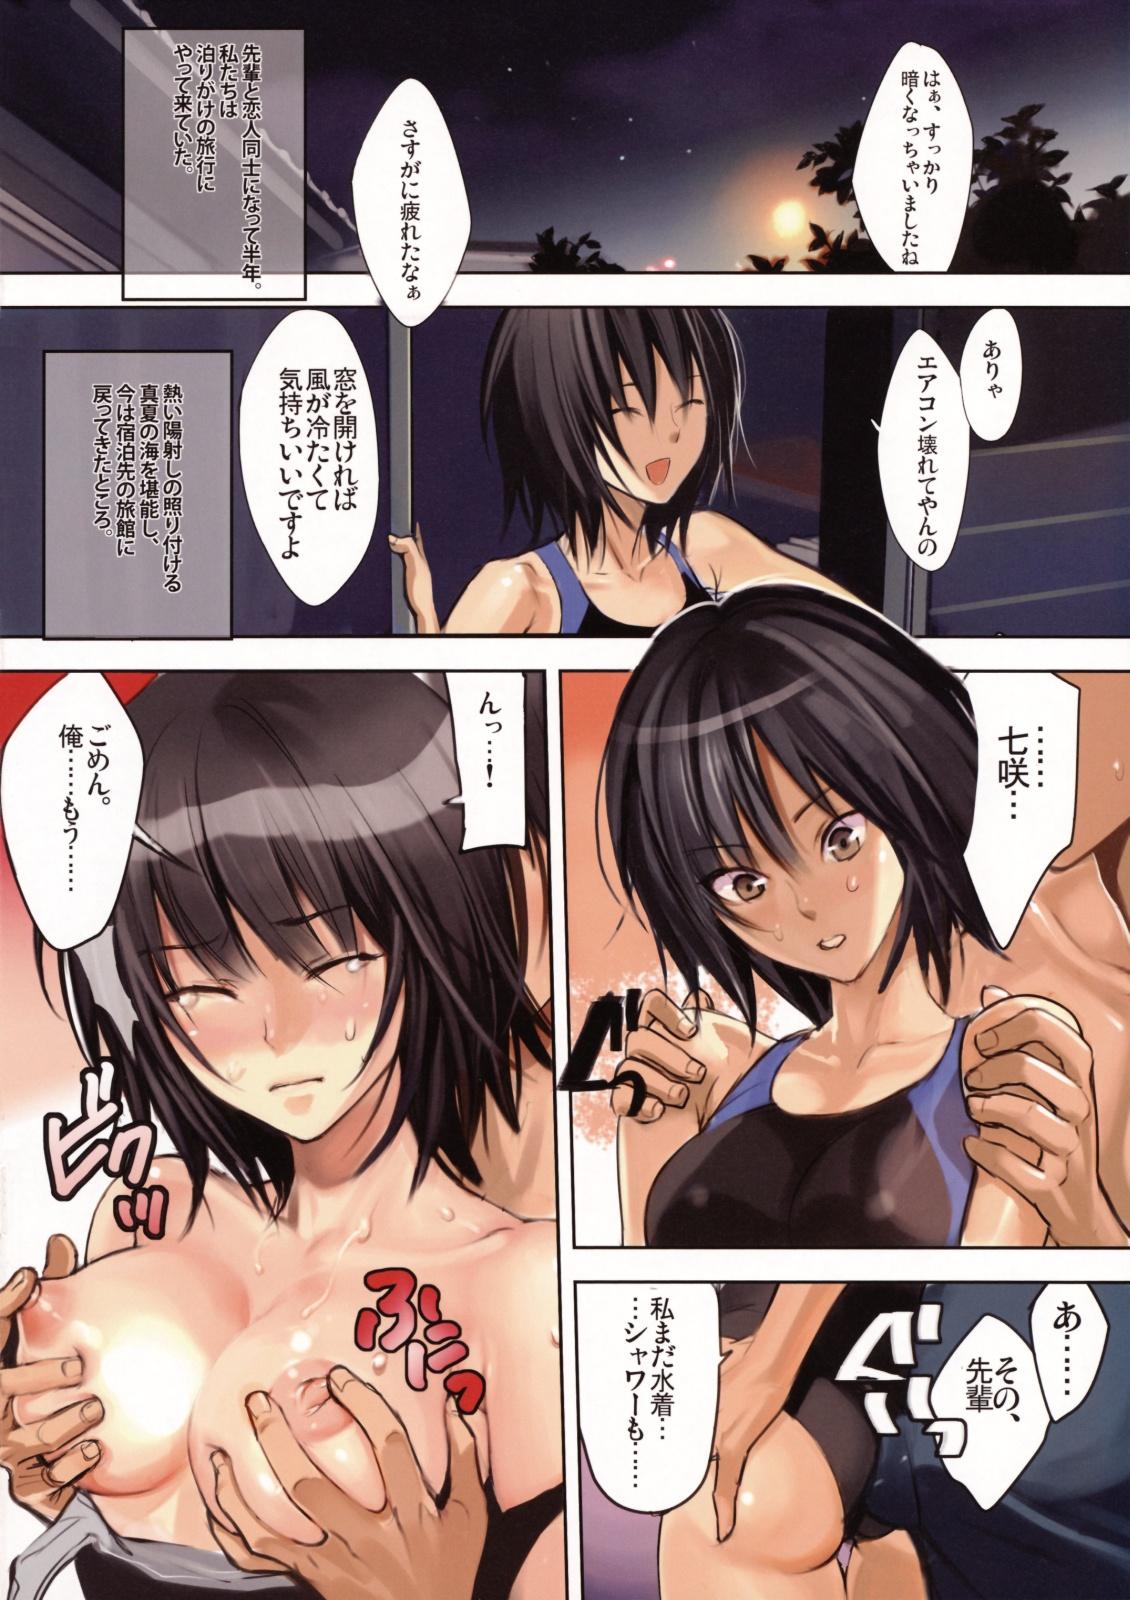 Vagina First Love - Amagami Making Love Porn - Page 2